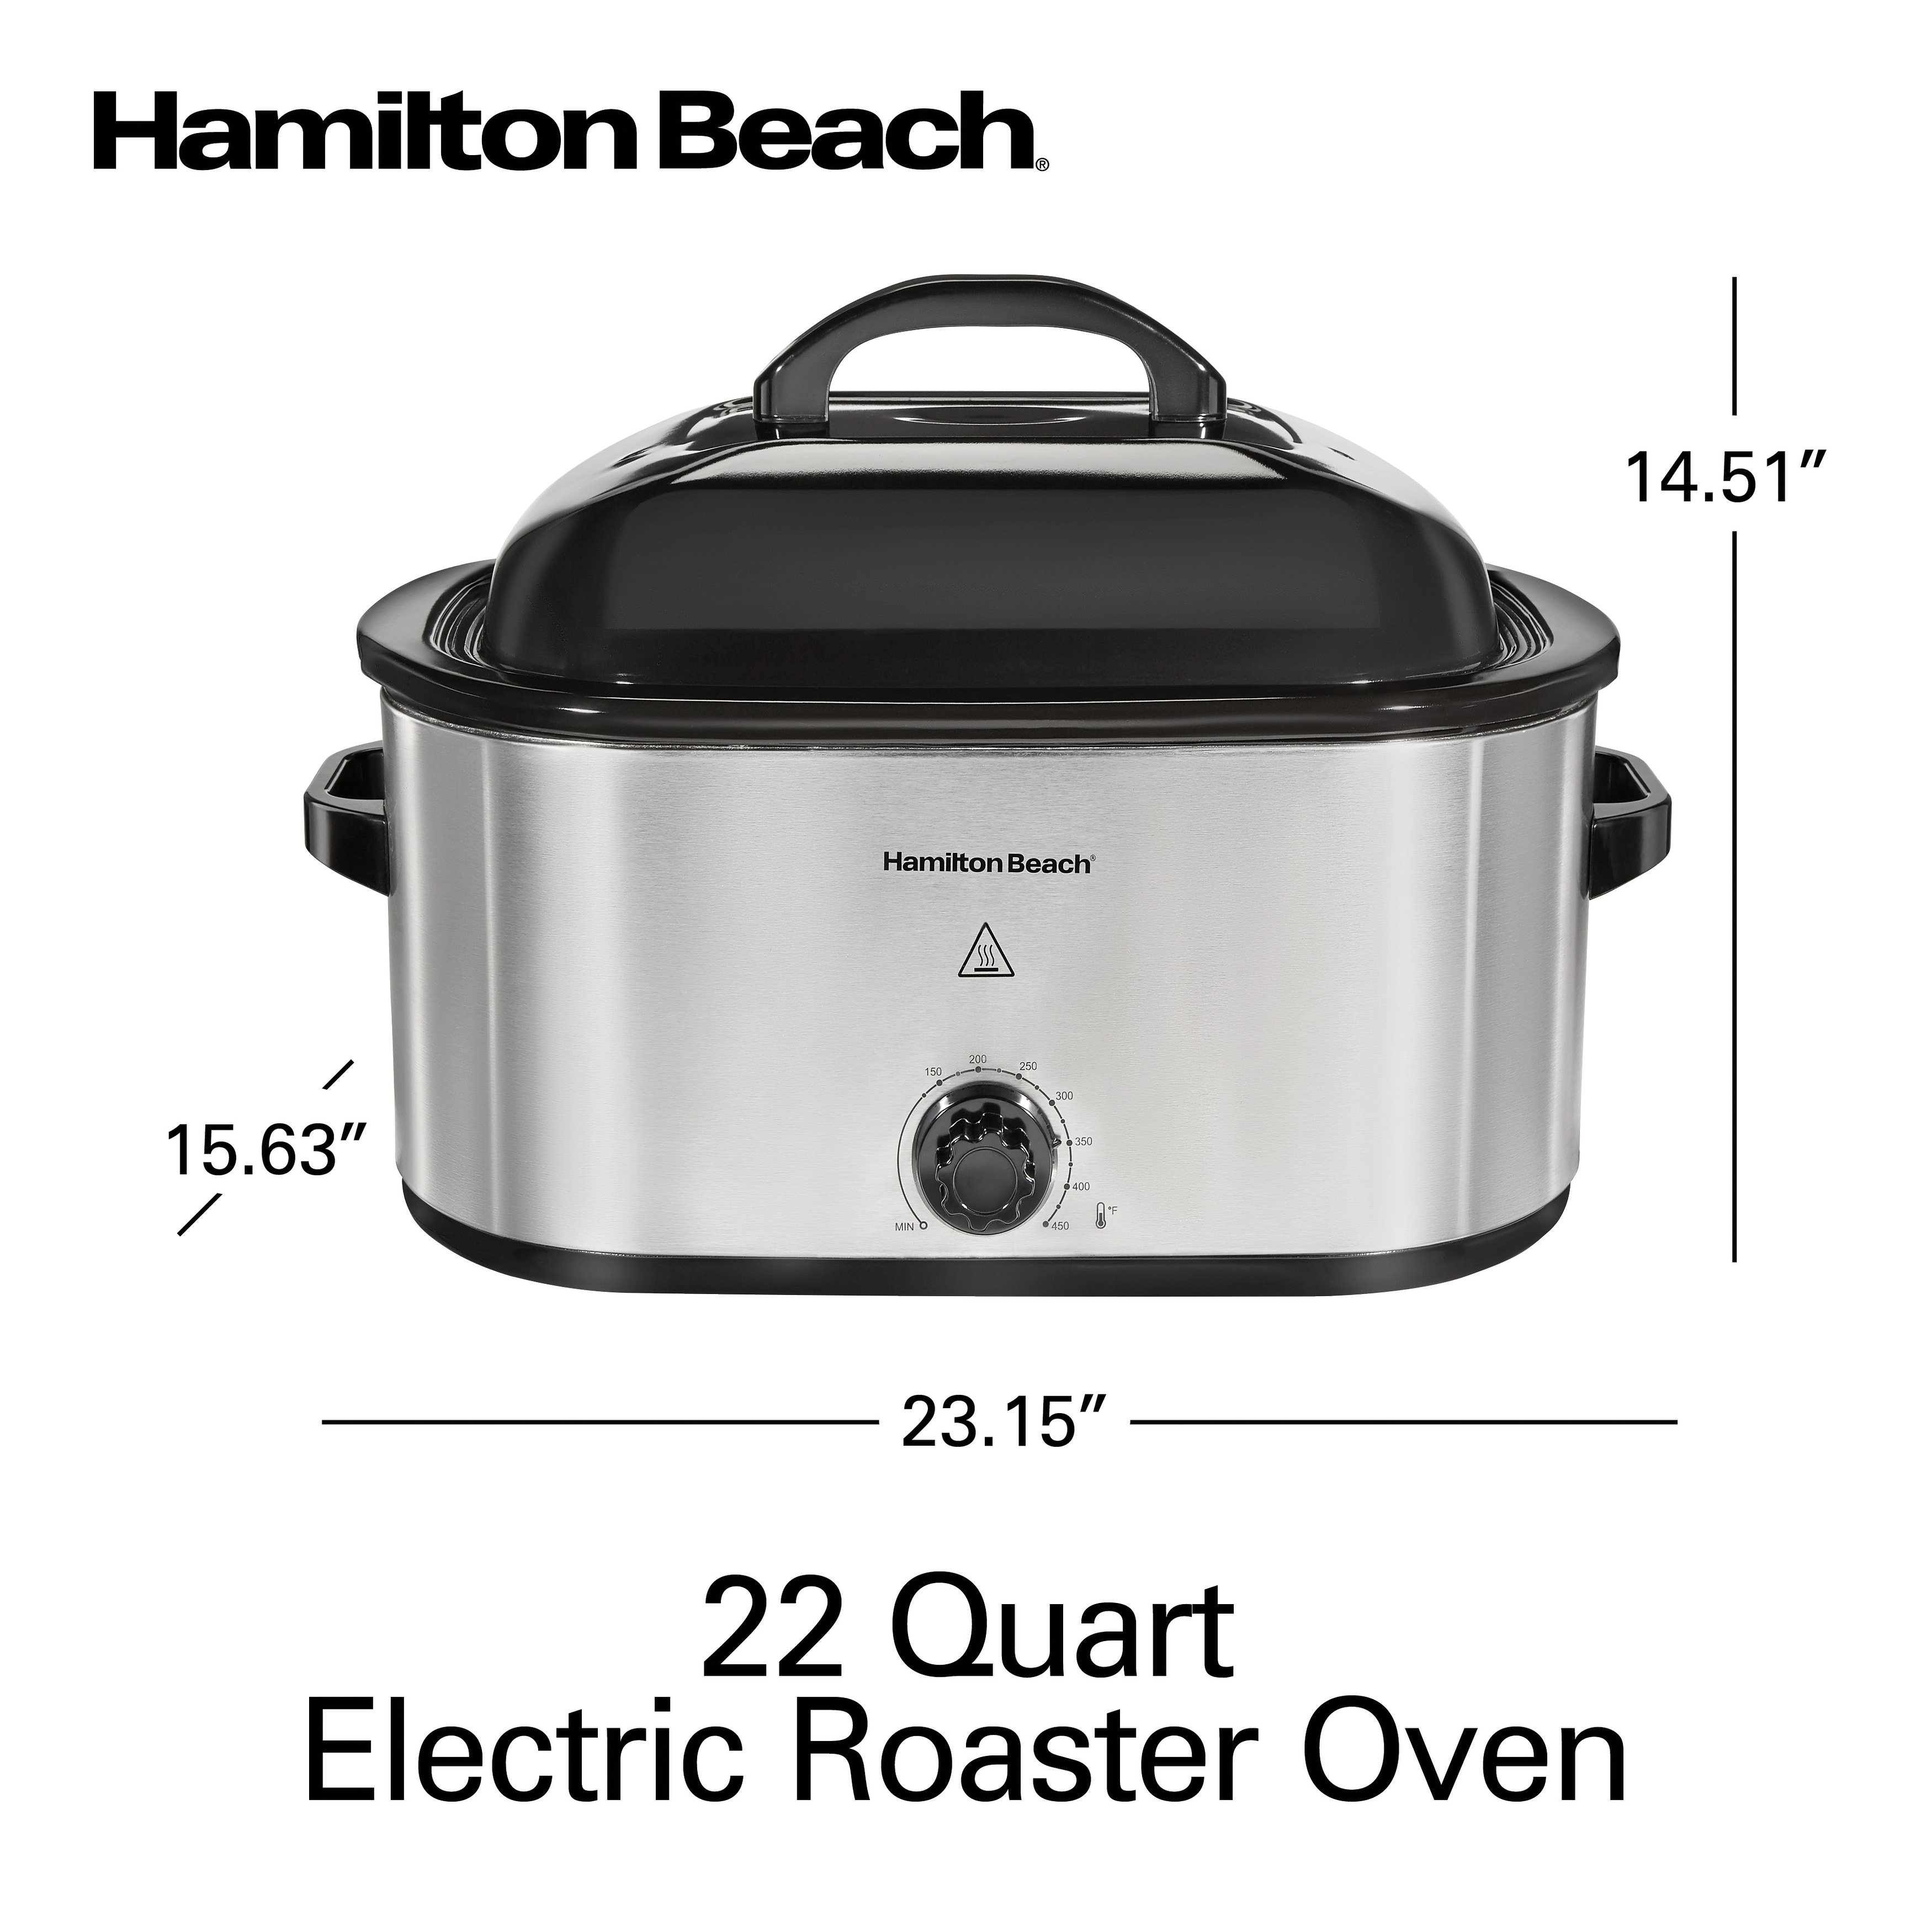 https://ak1.ostkcdn.com/images/products/is/images/direct/a8d7a393fcea623d5ba1d29d1b8fe6327b8ad095/Hamilton-Beach-22-Quart-Stainless-Steel-Electric-Roaster-Oven.jpg